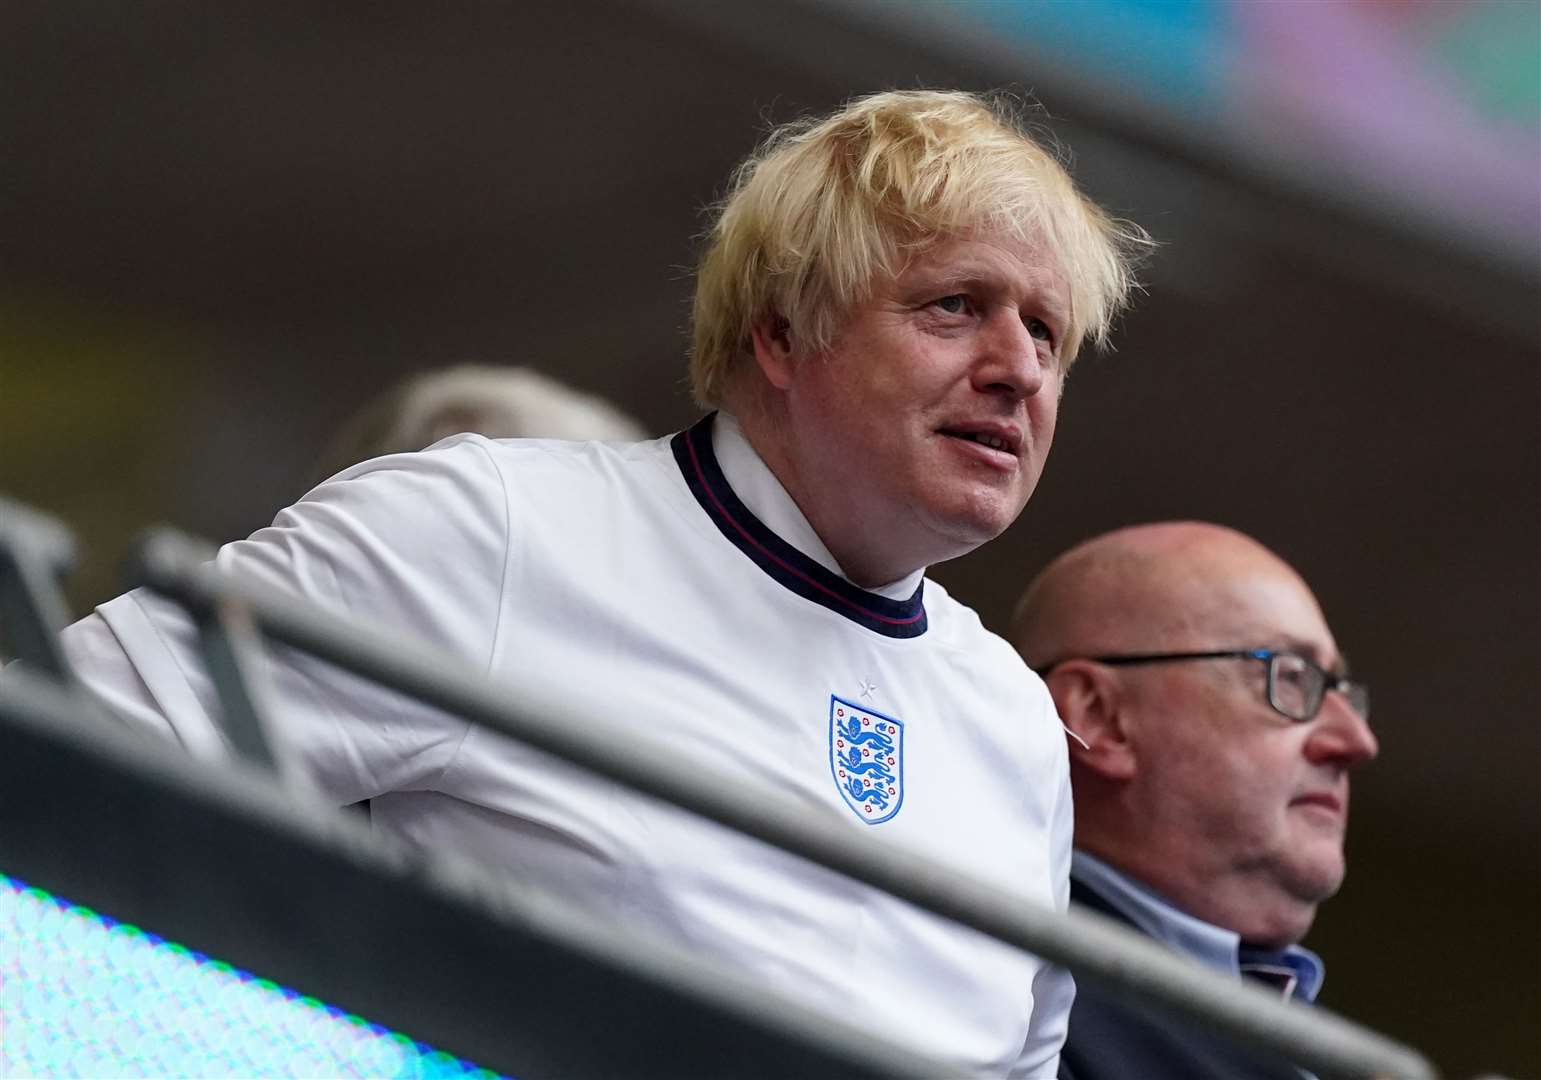 In a swipe at Boris Johnson, Sir Keir Starmer said ‘real fans’ do not wear an England top over a shirt and tie (Mike Egerton/PA)